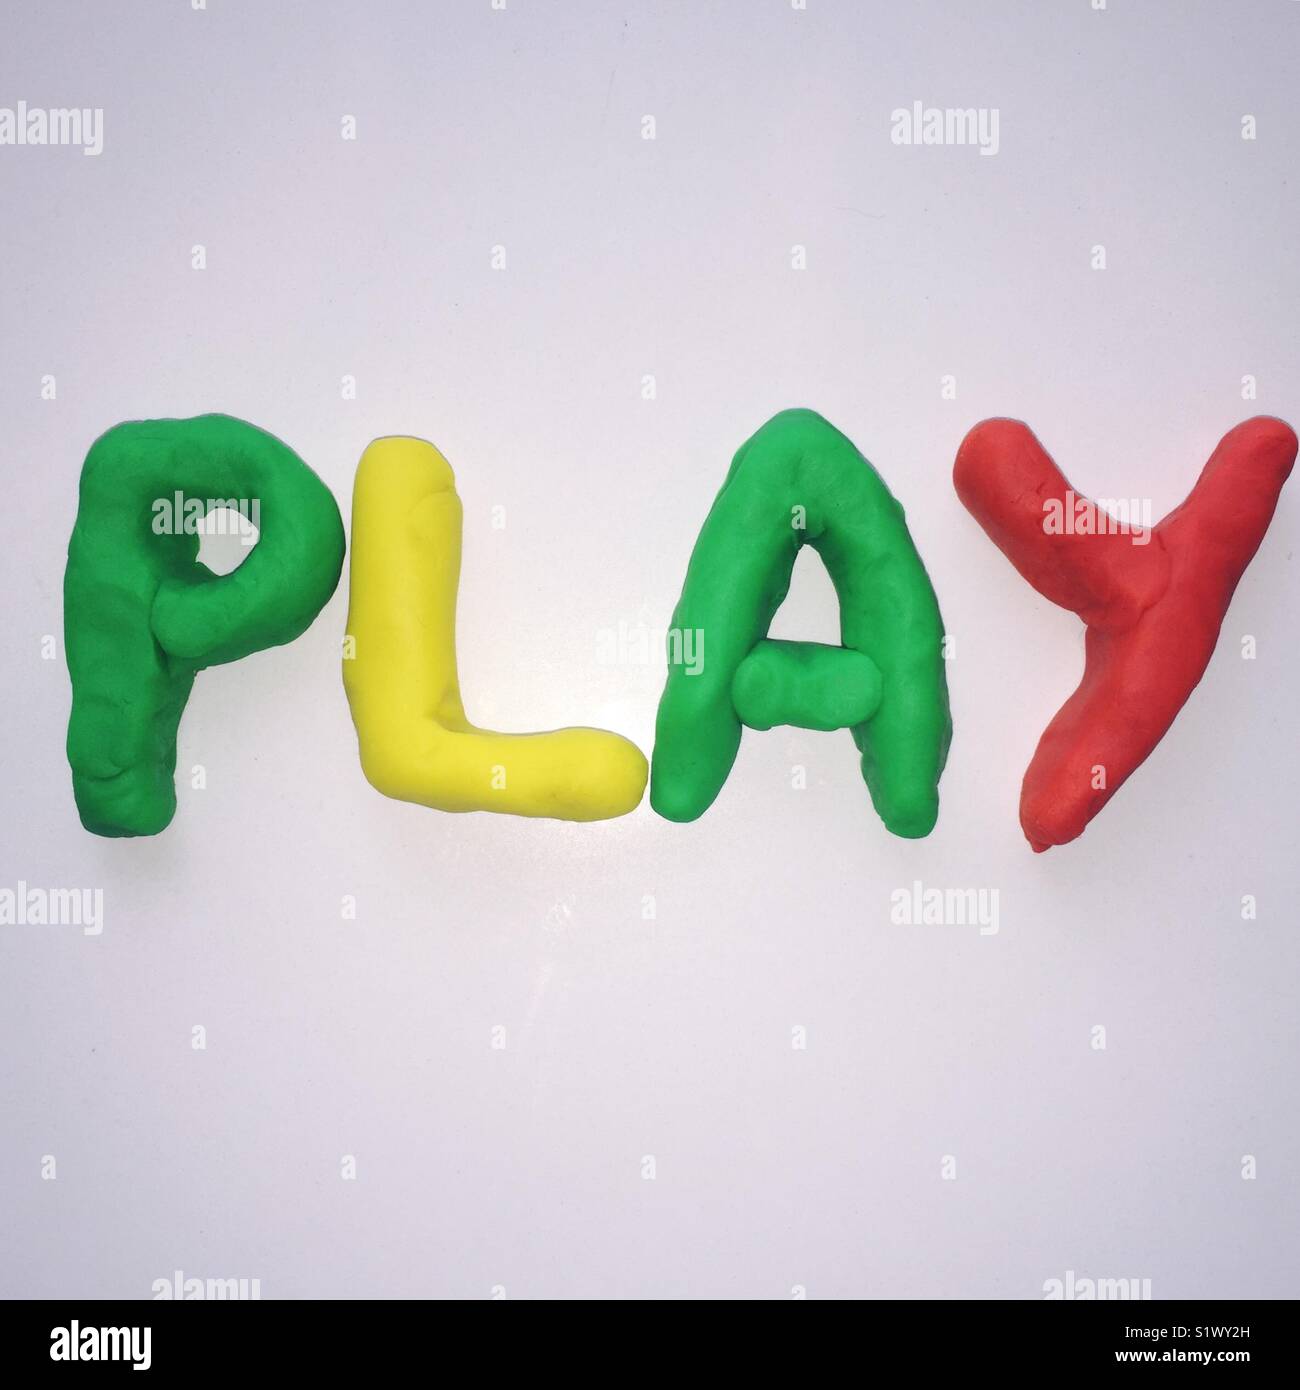 Play Time Stock Photo